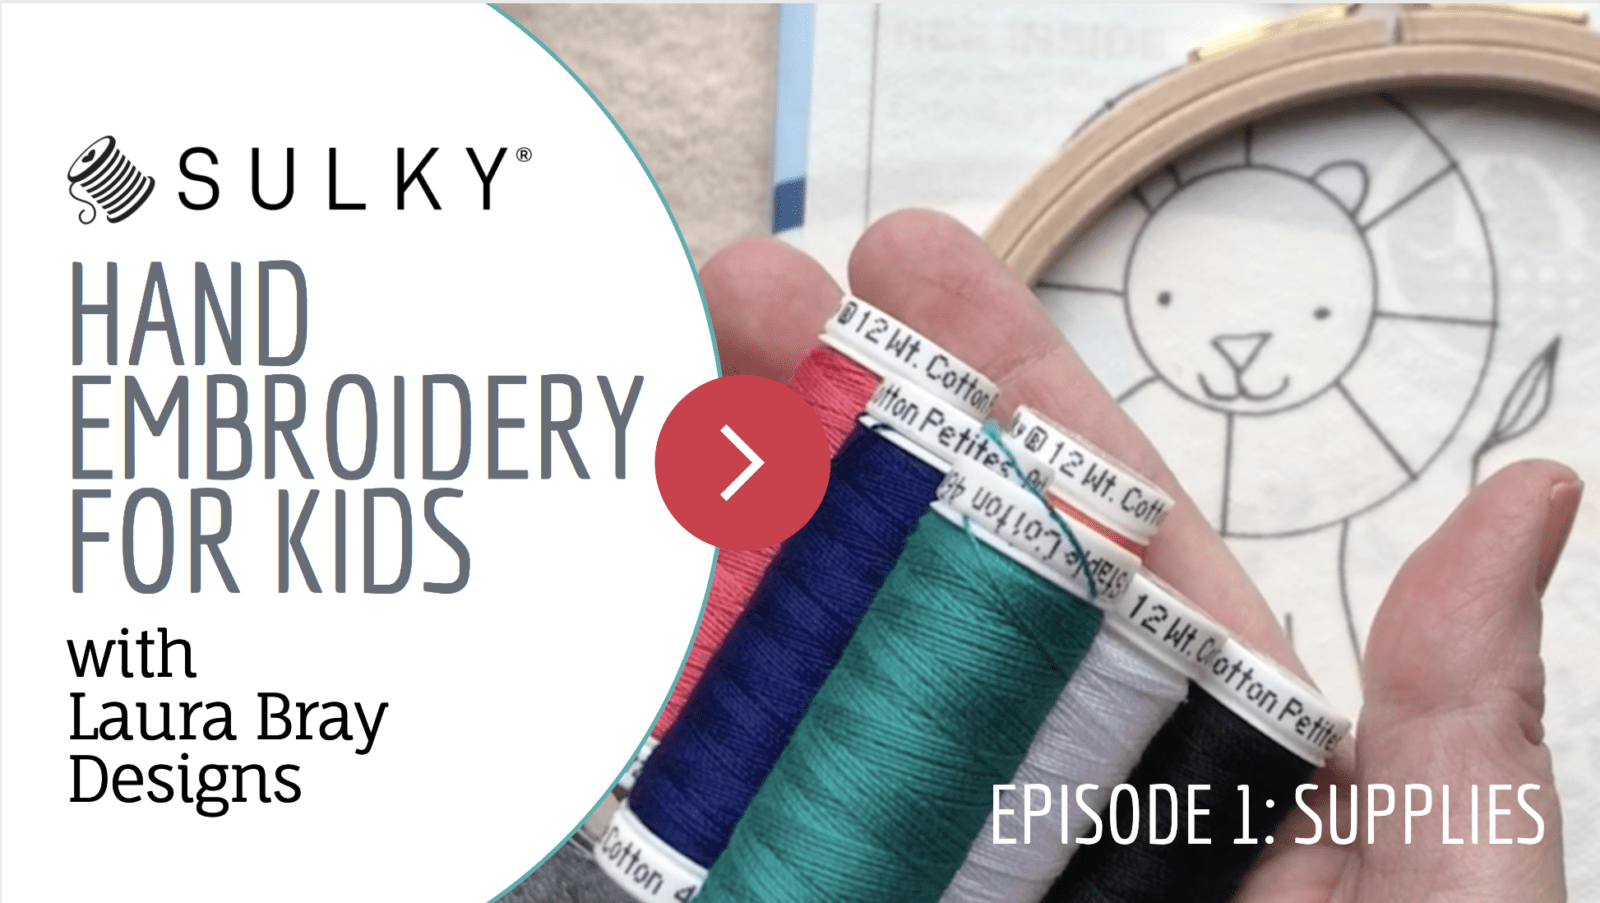 Hand Embroidery for Kids - New Video Series, Episode 1 - Sulky